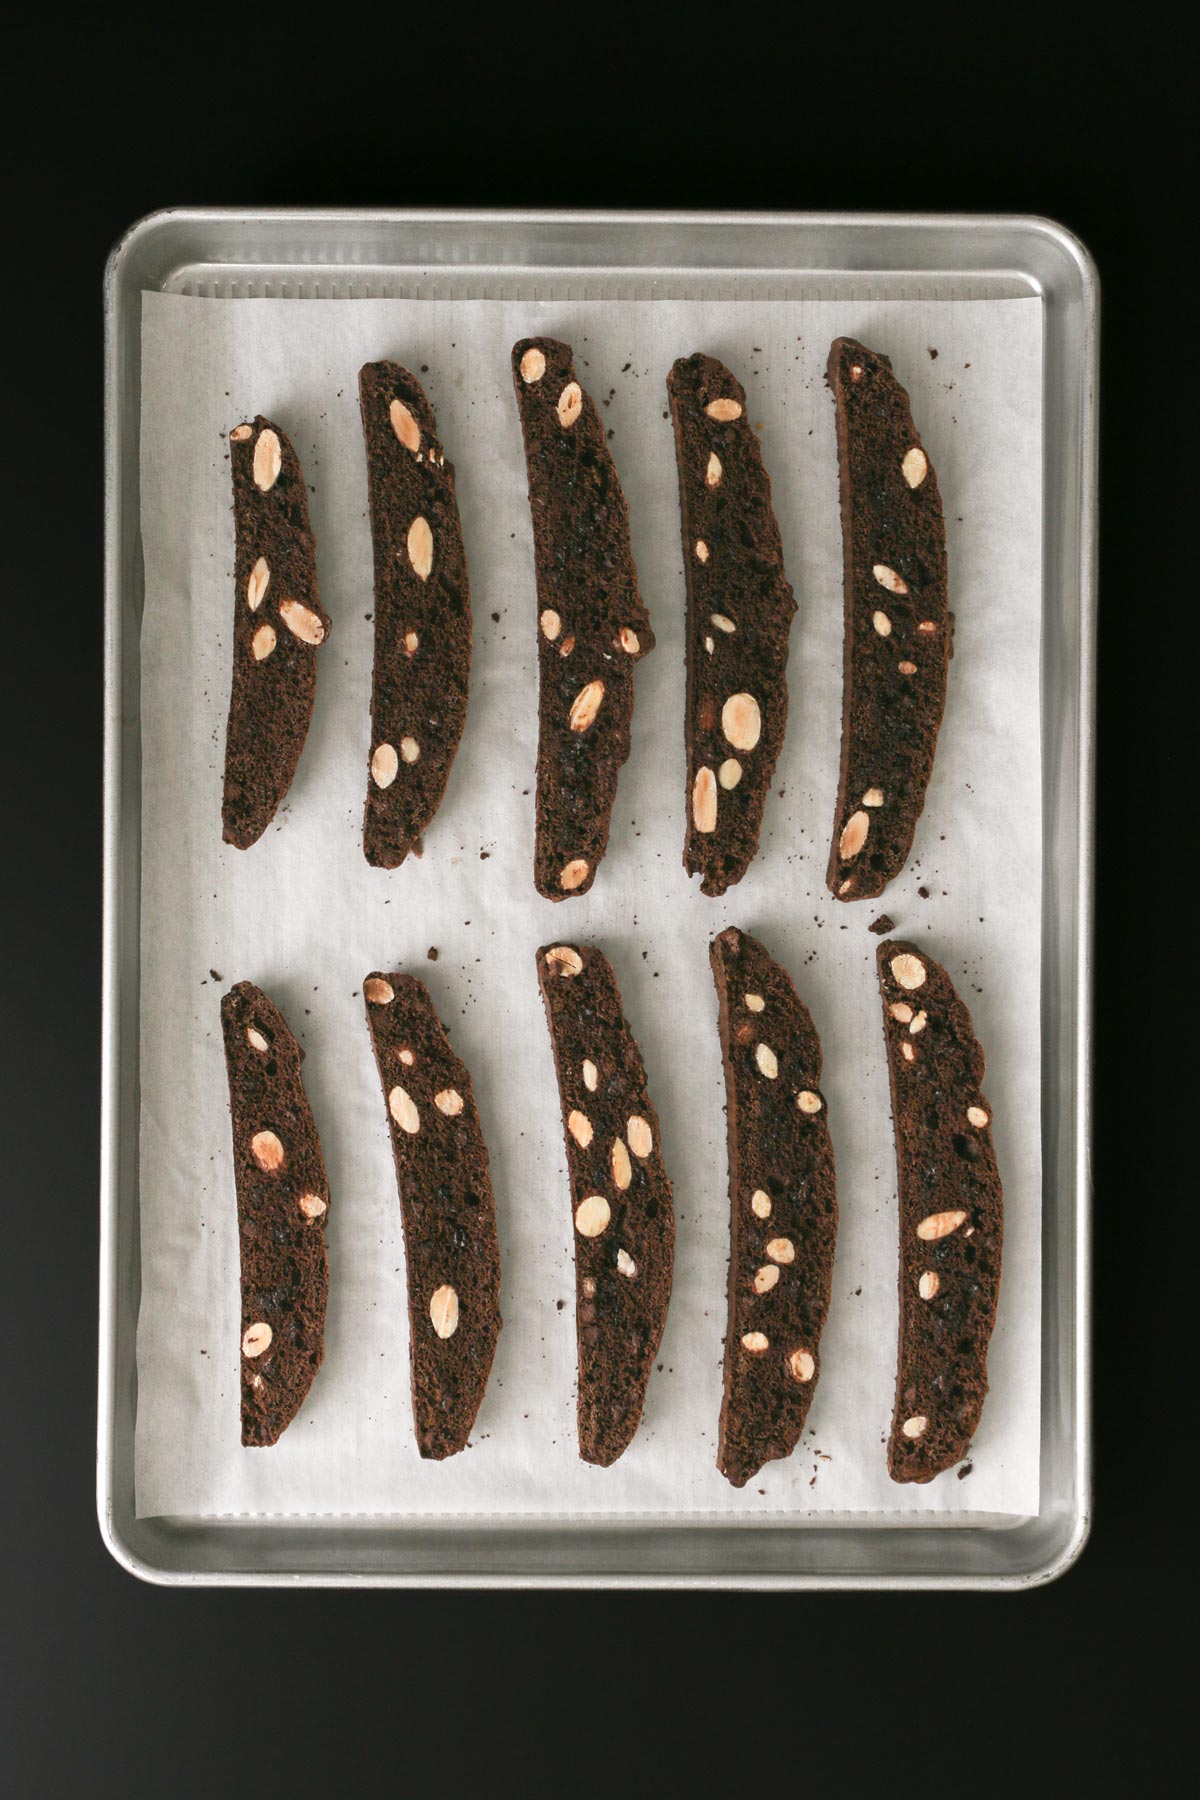 biscotti flipped on parchment on baking sheet.